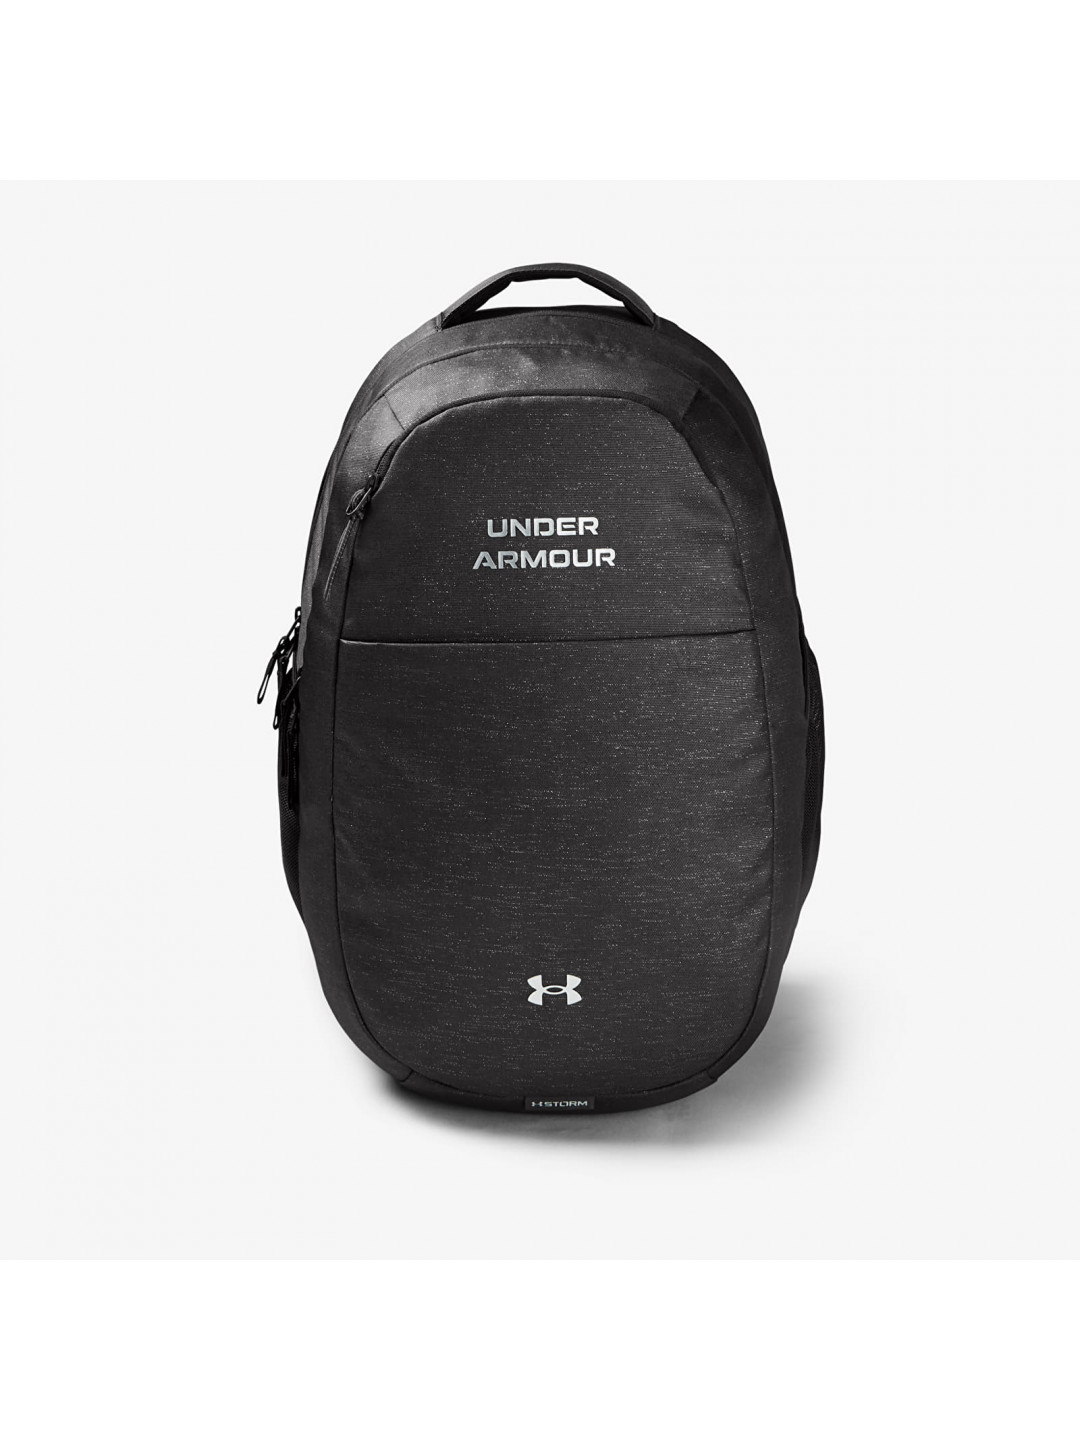 Under Armour Hustle Signature Backpack Gray